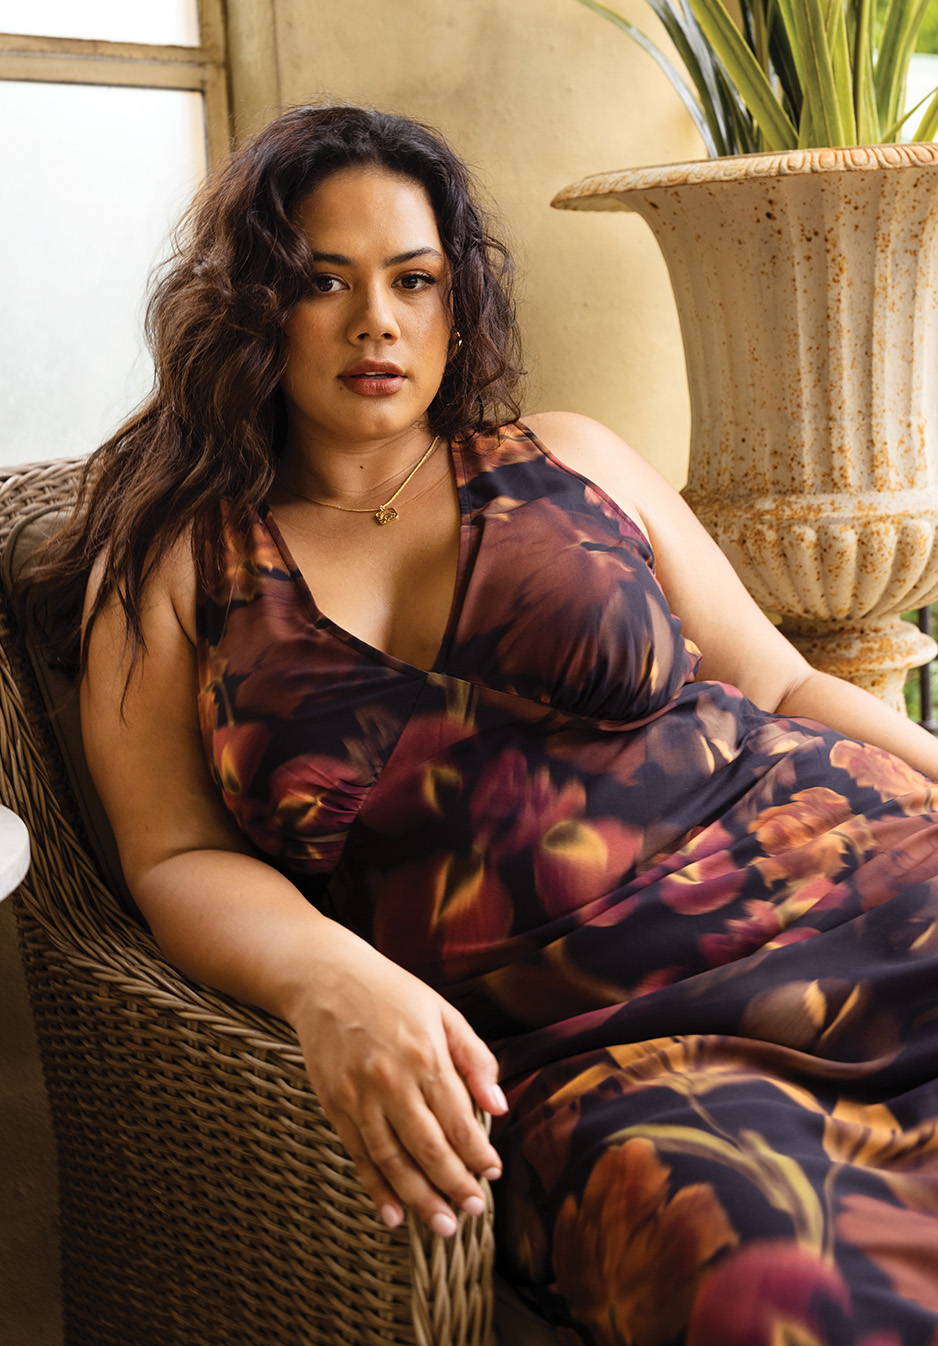 Shop dresses, tops, skirts, pants, denims at you and all curvy PLUS size